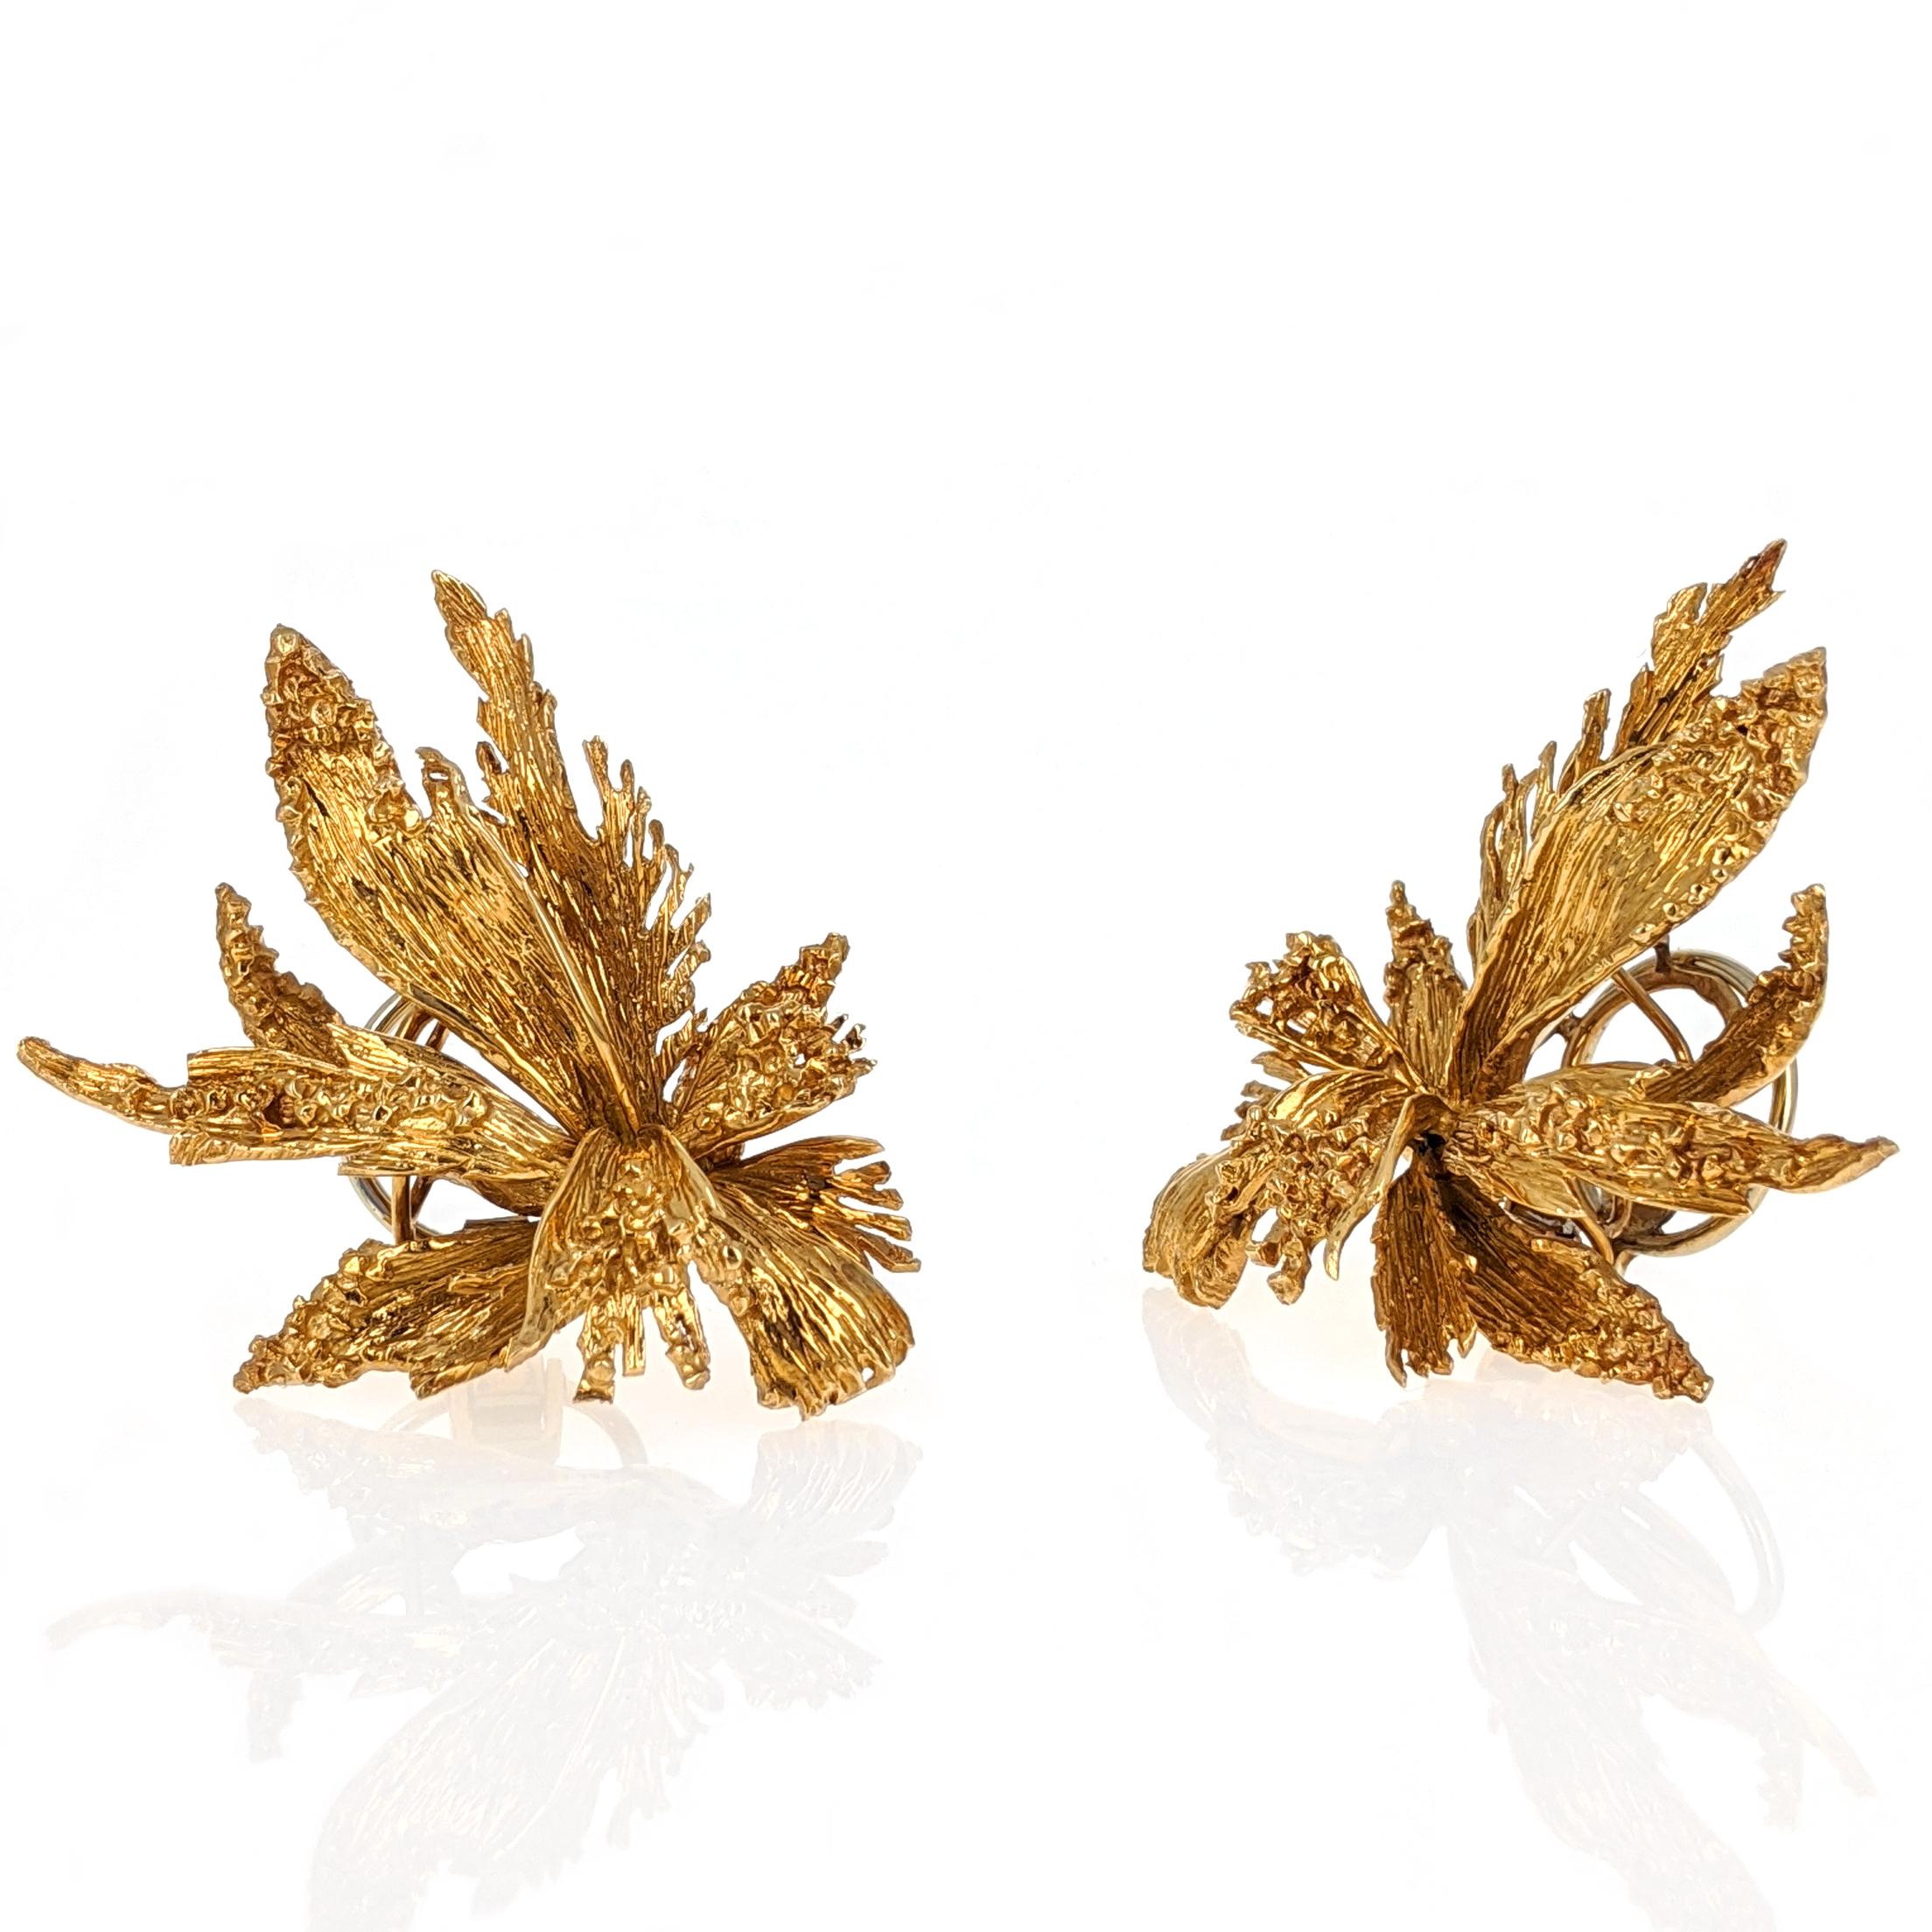 These 1970s clips earrings by Chaumet are expertly crafted in 18 karat yellow gold. They are stylized as leaves and the textured metal captures and reflects light beautifully. They are signed, with maker's mark and with French assay marks. They are